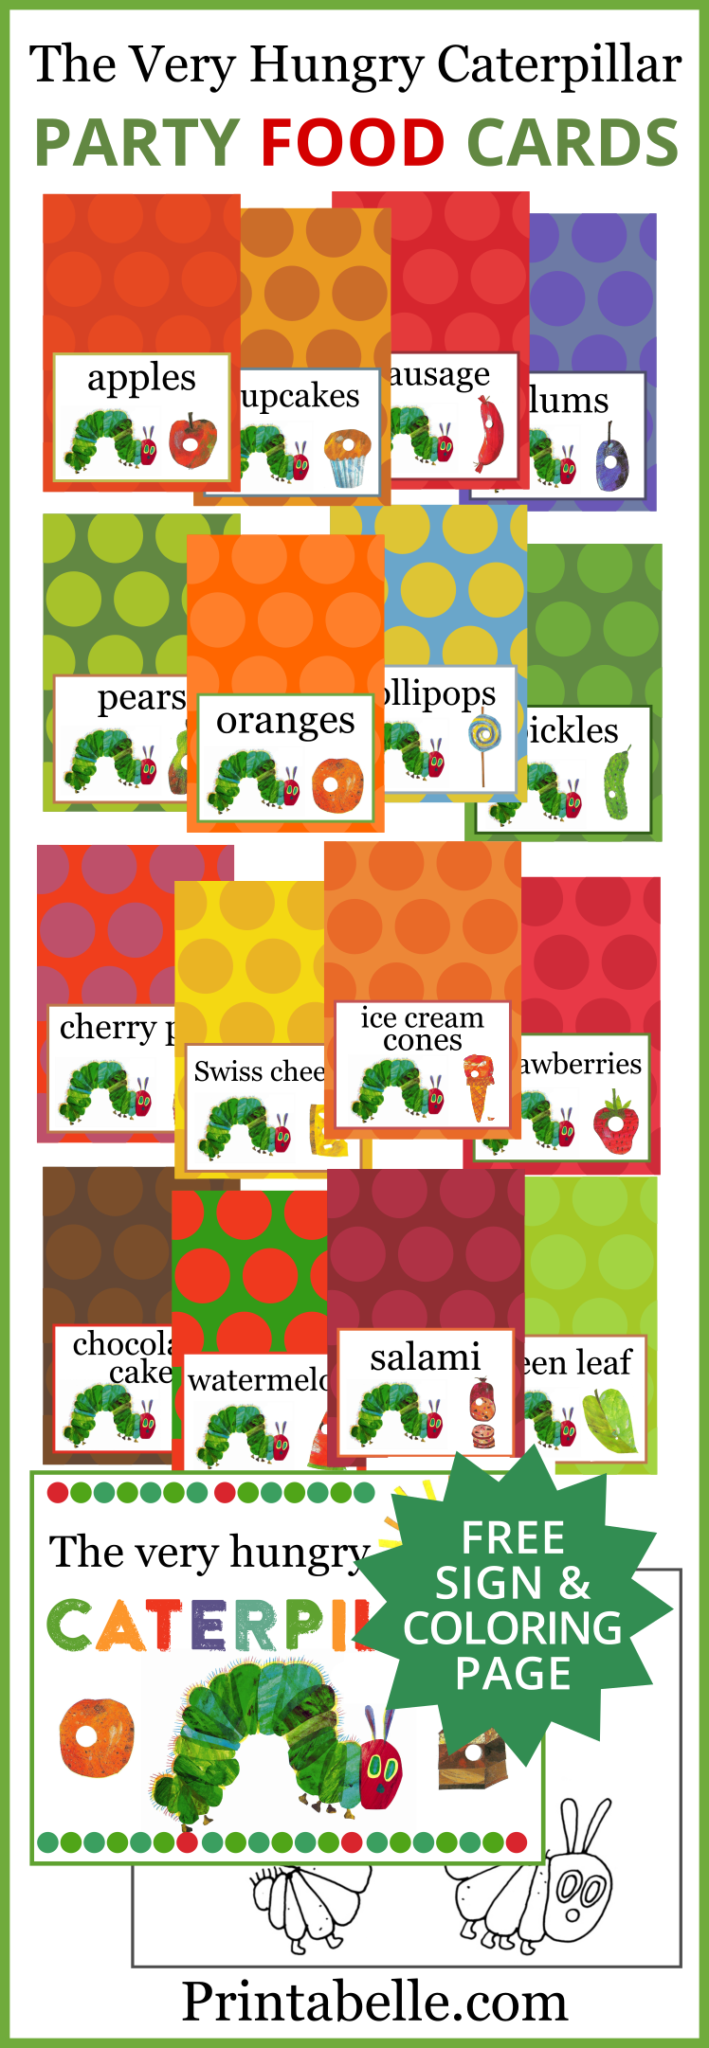 The Very Hungry Caterpillar Printable Food Cards (Free Sign and